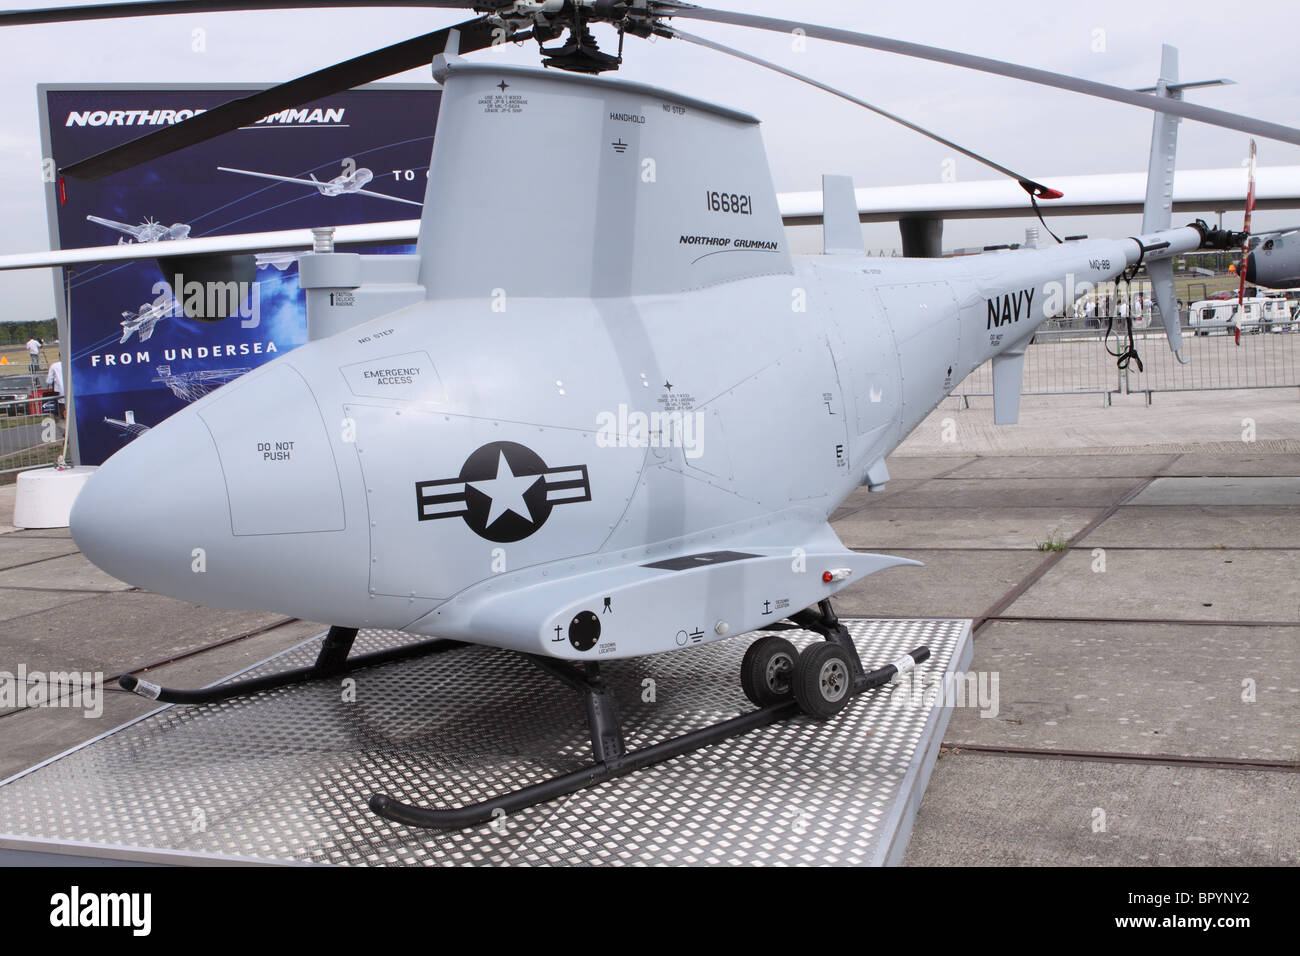 Northrop Grumman MQ-8 Fire Scout unmanned UAV helicopter operated by the US Navy at Farnborough 2010 Stock Photo